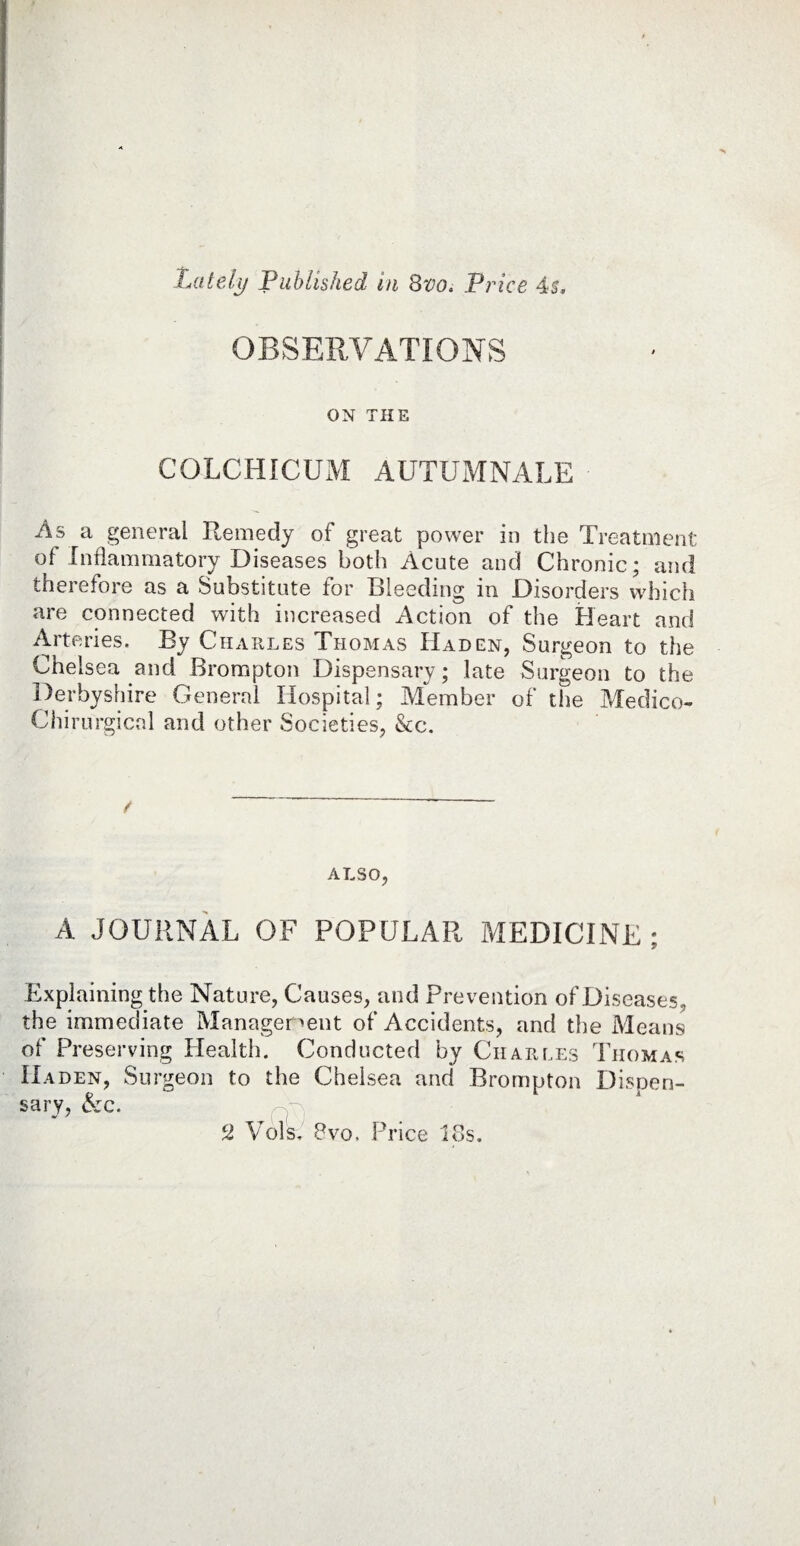 OBSERVATIONS ON THE COLCHICUM AUTUMNALE As a general Remedy of great power in the Treatment of Inflammatory Diseases both Acute and Chronic; and therefore as a Substitute for Bleeding in Disorders which are connected with increased Action of the Heart and Arteries. By Charles Thomas Had en, Surgeon to the Chelsea and Brompton Dispensary; late Surgeon to the Derbyshire General Hospital; Member of the Medico- Chirurgical and other Societies, &c. / ALSO, A JOURNAL OF POPULAR MEDICINE * 9 Explaining the Nature, Causes, and Prevention of Diseases, the immediate Management of Accidents, and the Means of Preserving Health. Conducted by Charles Thomas IIaden, Surgeon to the Chelsea and Brompton Dispen¬ sary, &:c. c2 Vols. 8vo. Price 18s.